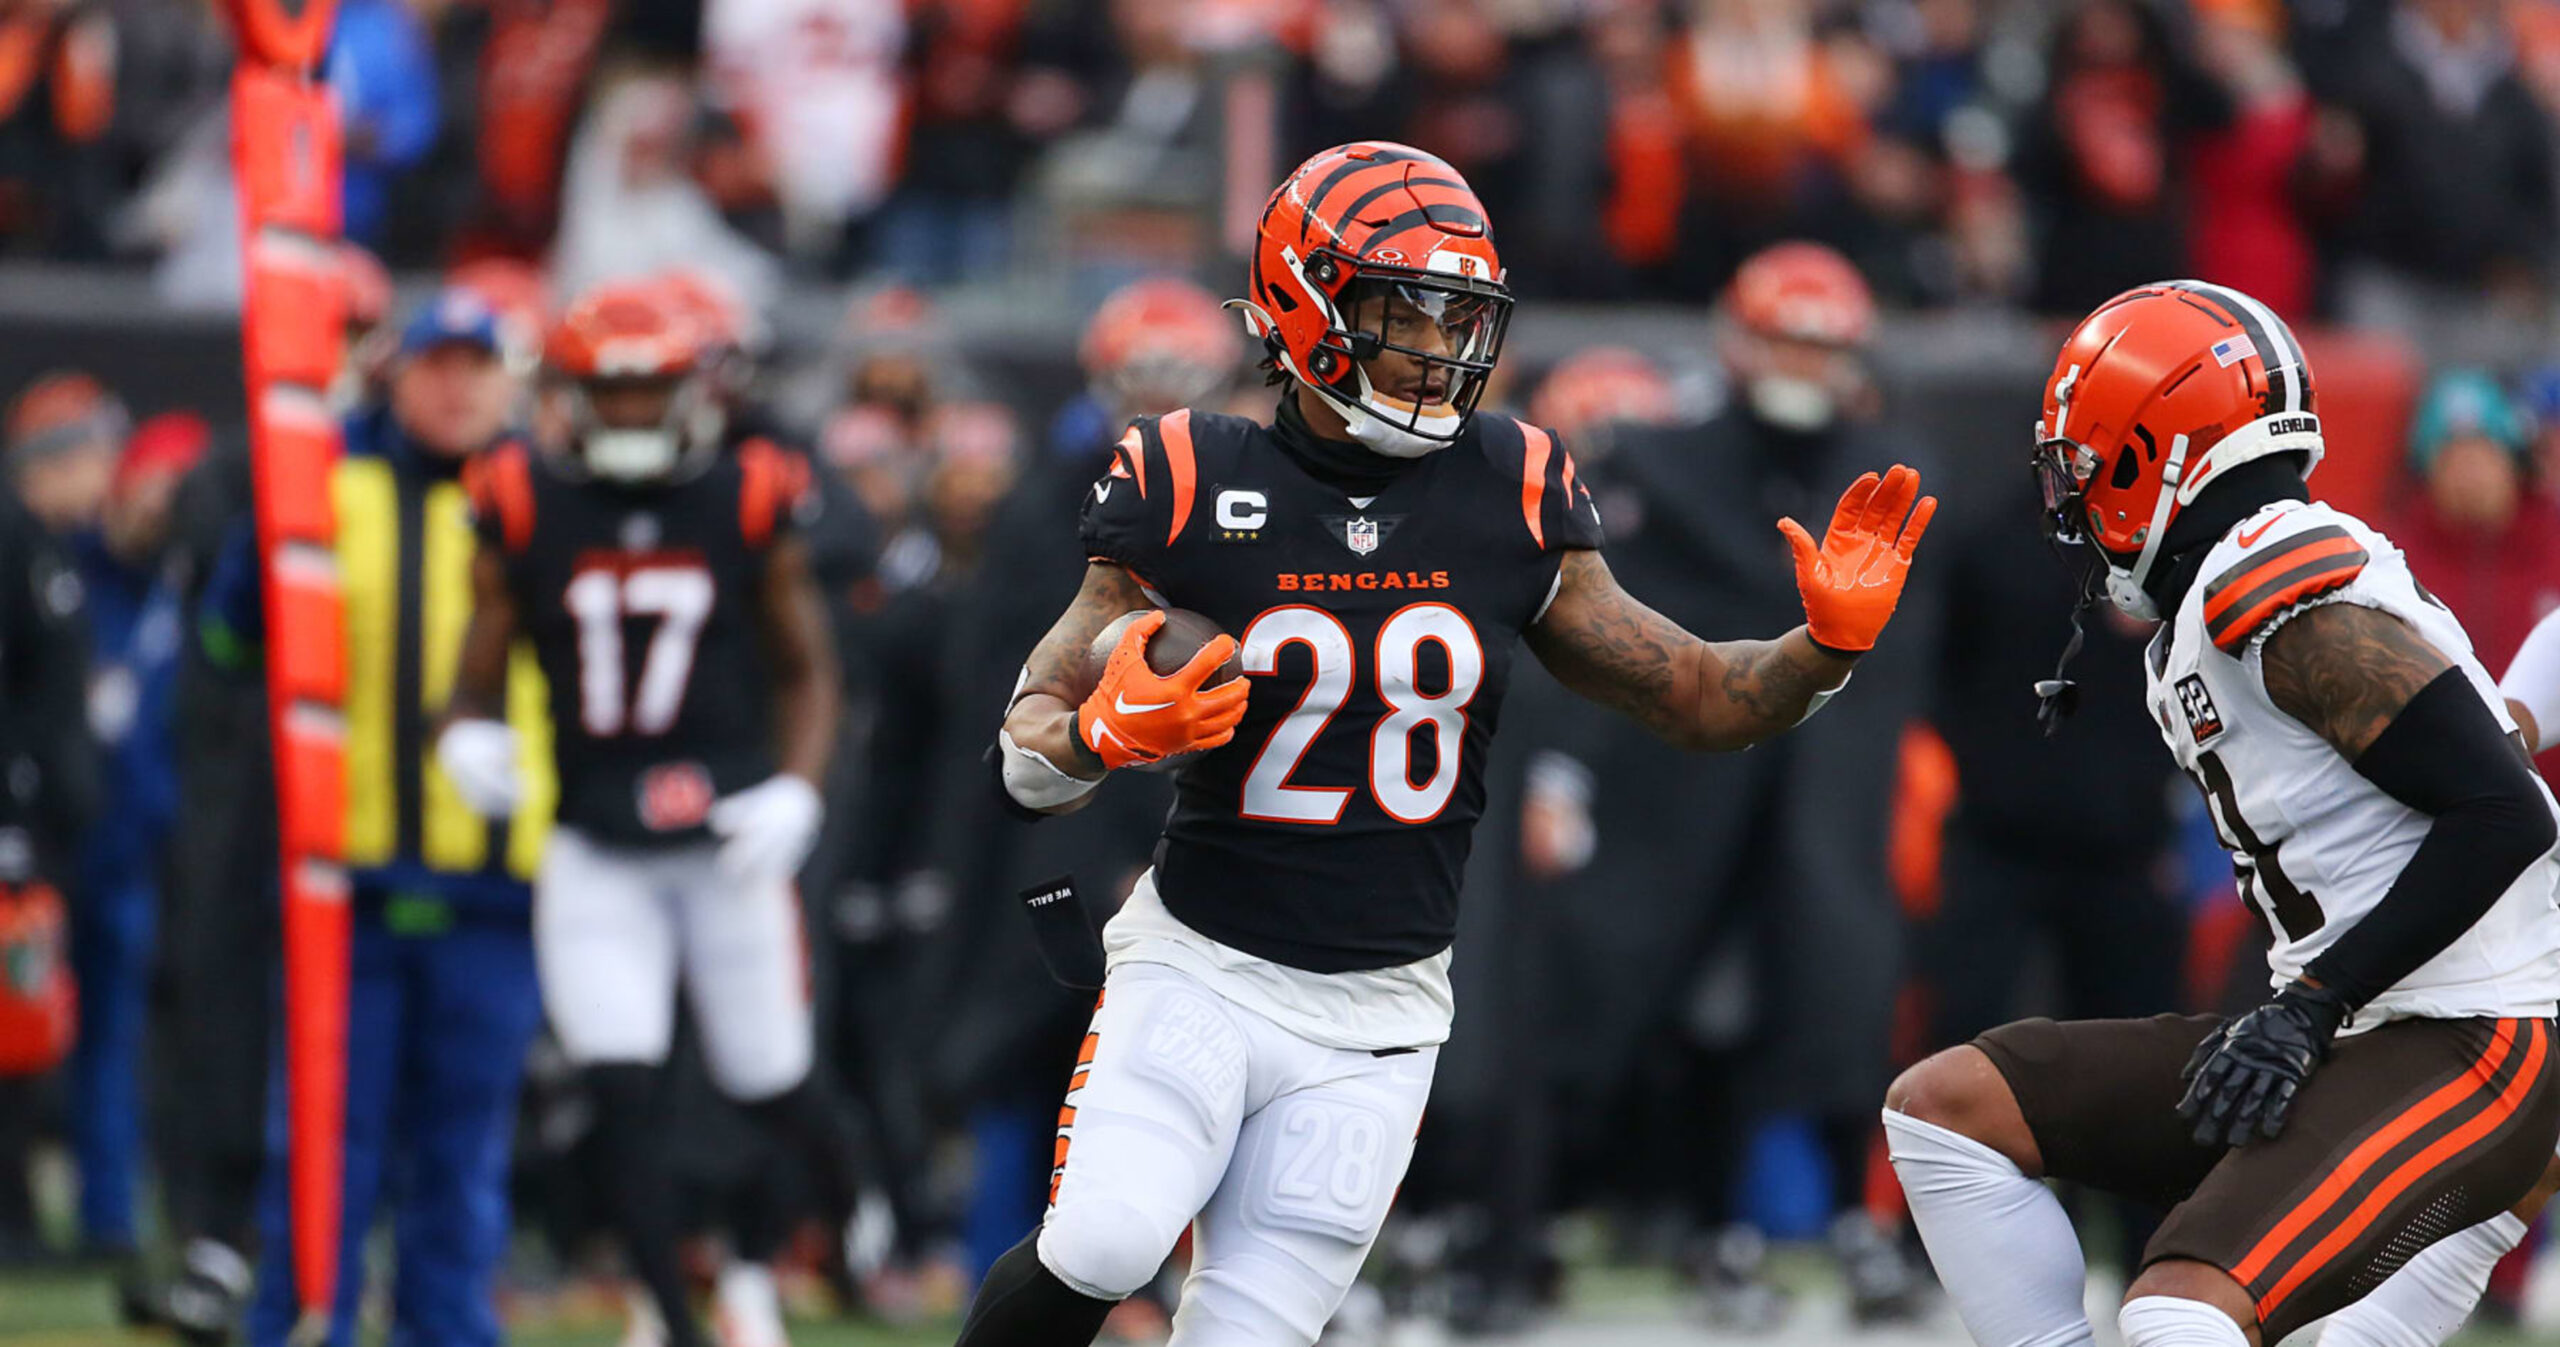 NFL Rumors: Bengals to Birth RB Joe Mixon, Label Zack Moss to 2-Year, $8M Contract